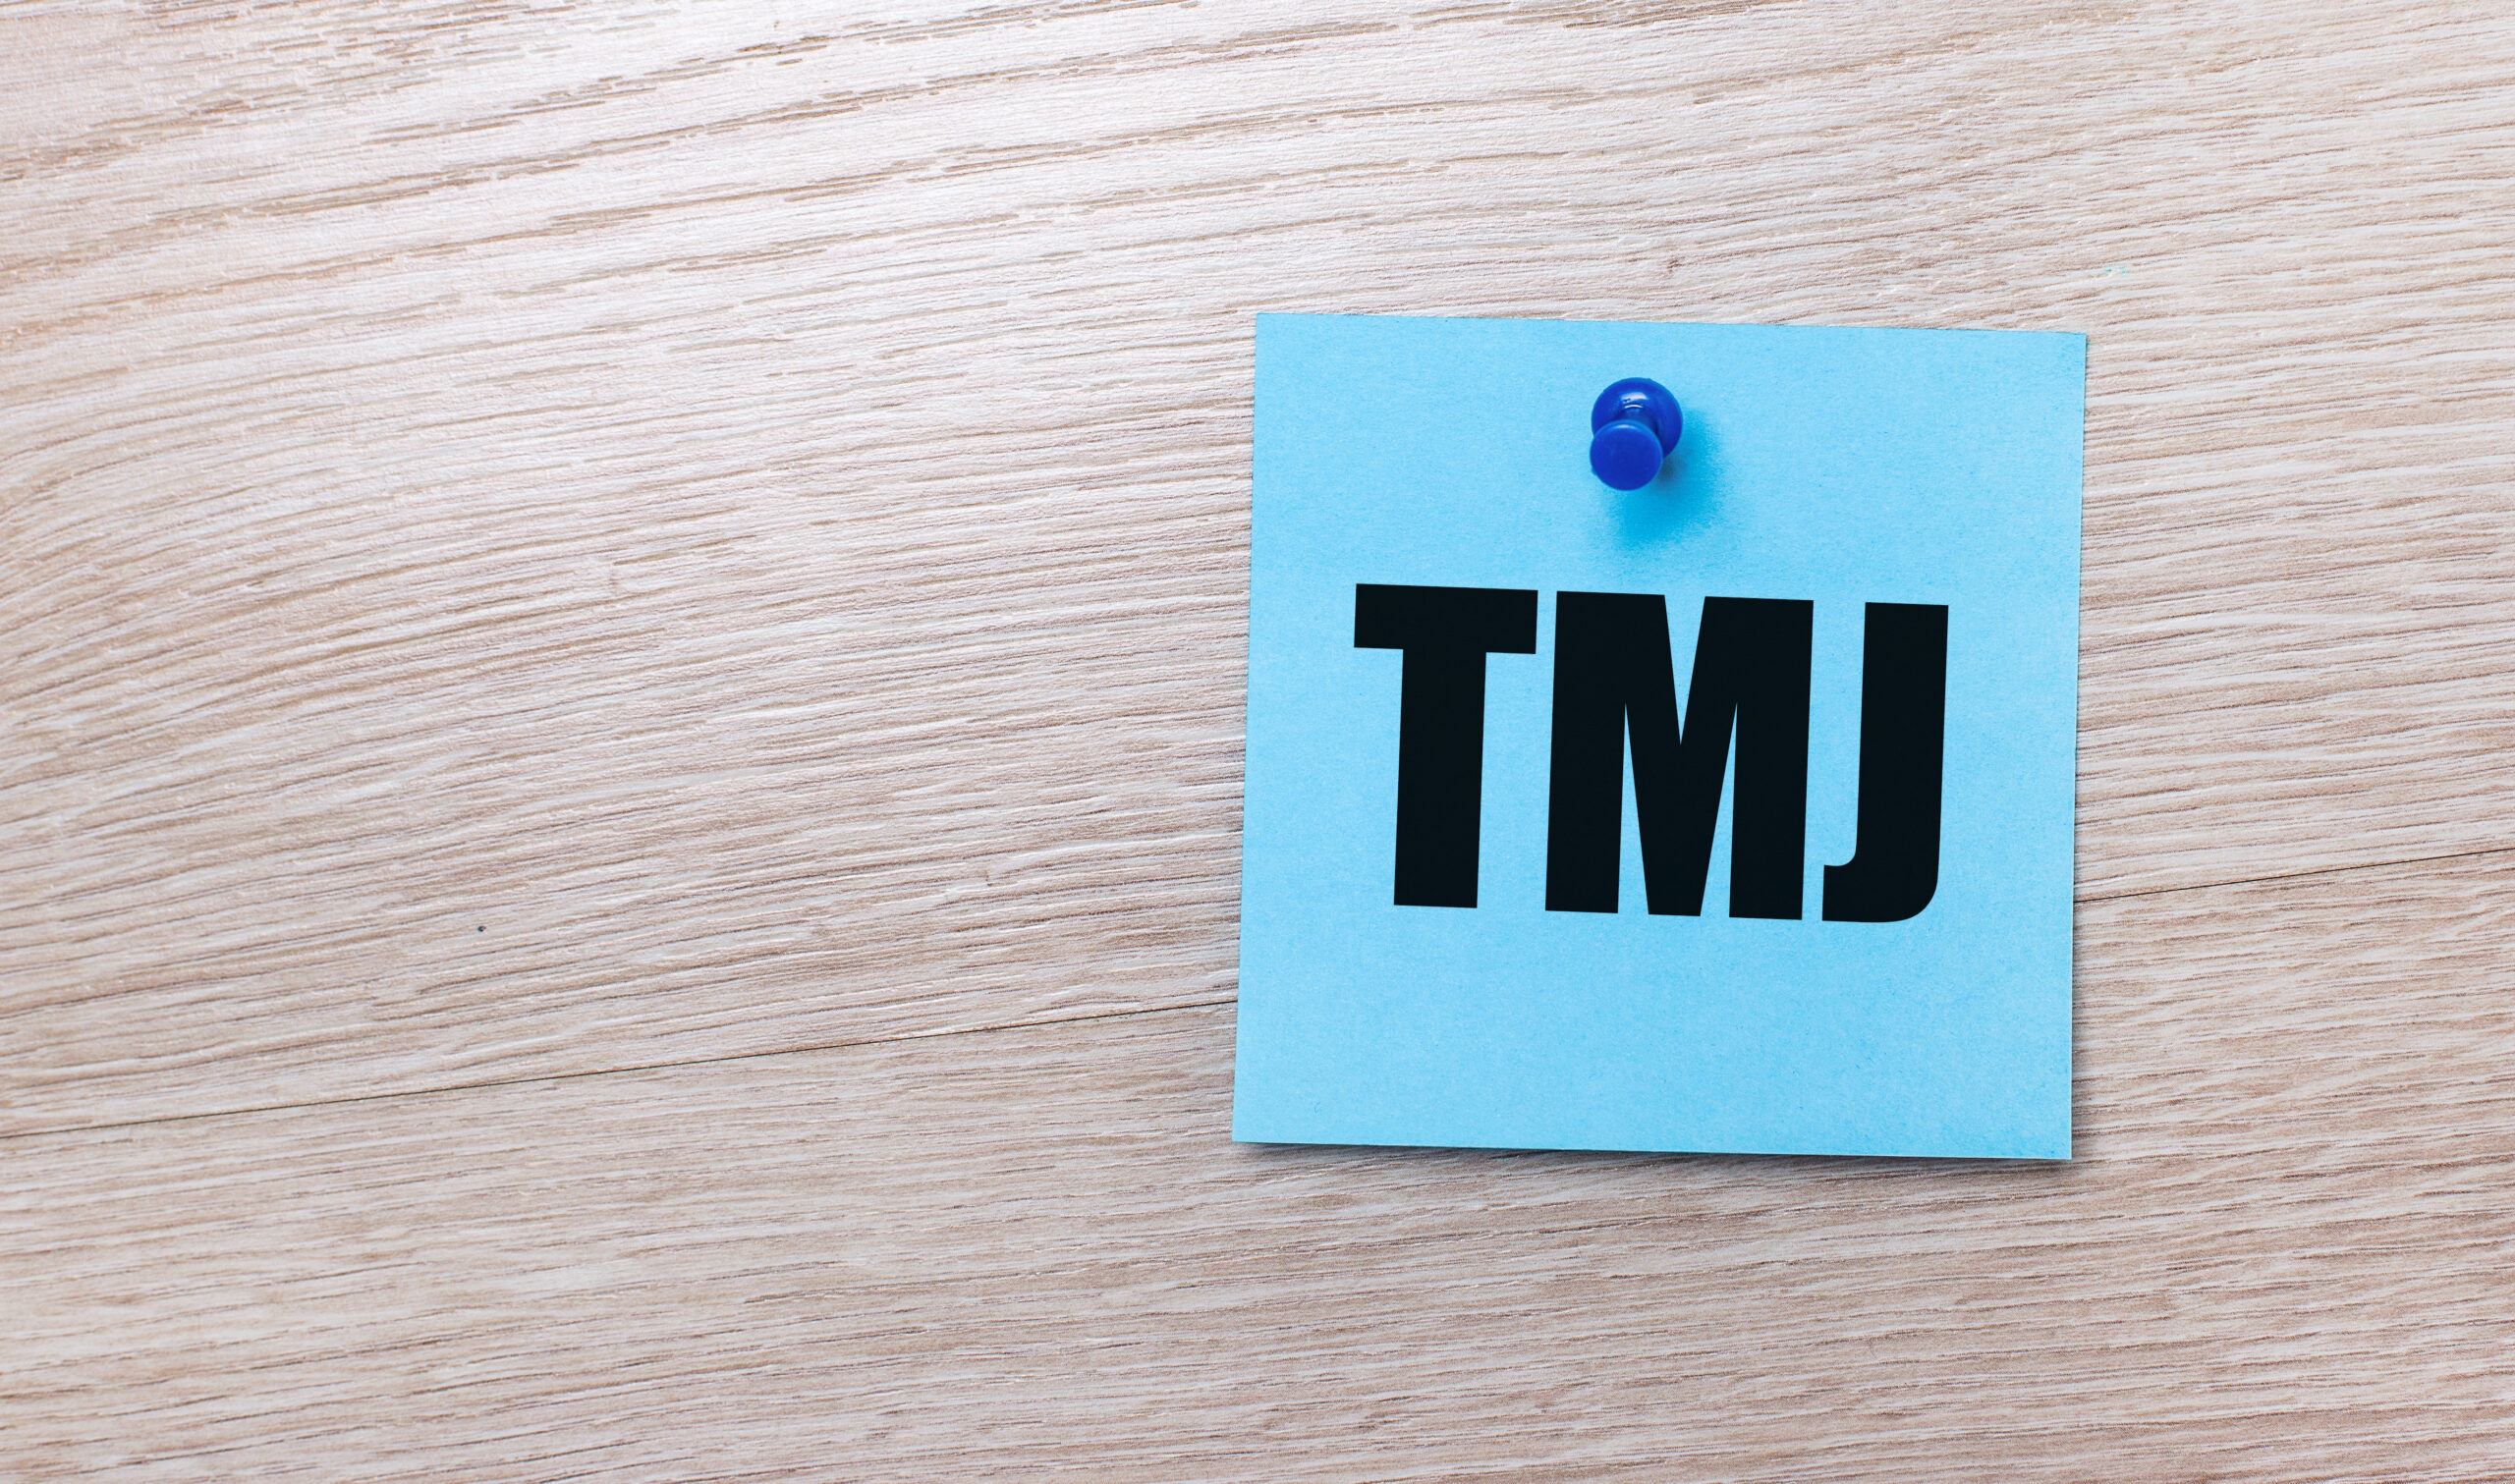 On a light wooden background - a light blue square sticker with the text TMJ